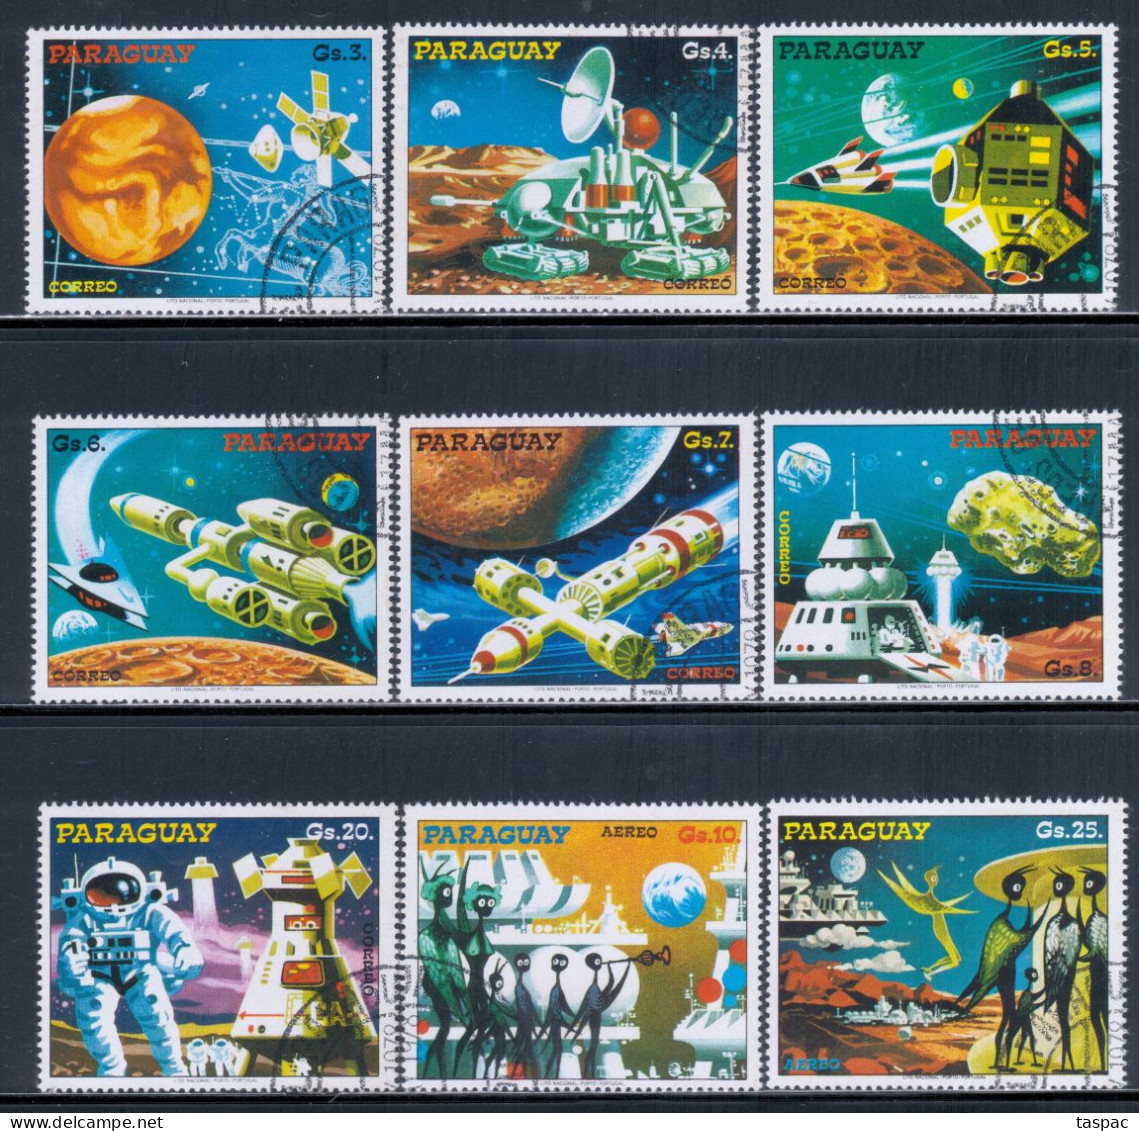 Paraguay 1978 Mi# 3051-3059 Used - Future Space Projects - Zuid-Amerika